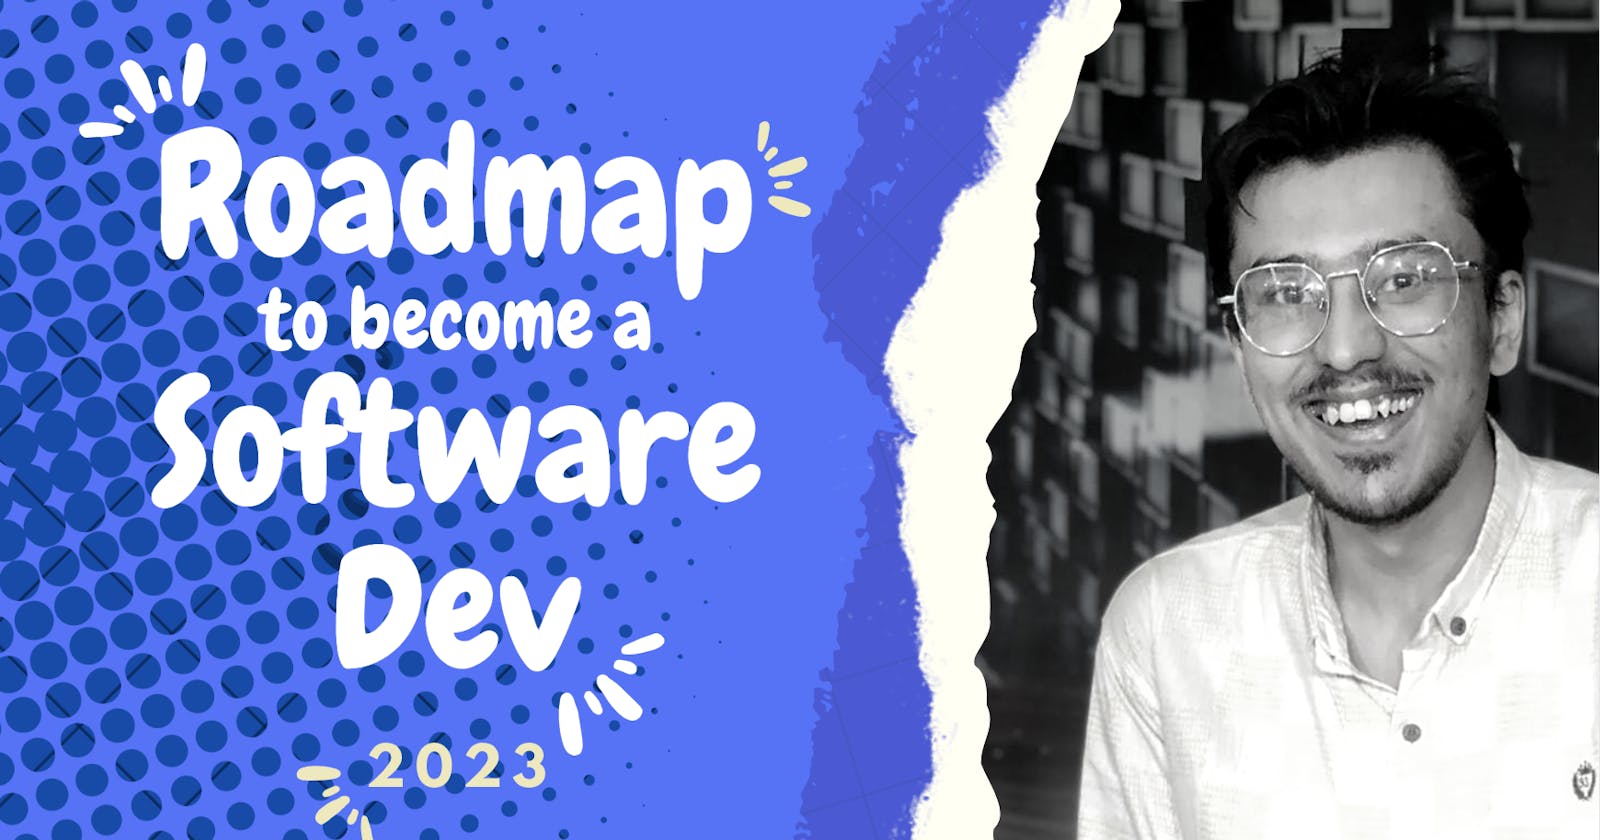 Your Roadmap to becoming a Full Stack Dev in 2023